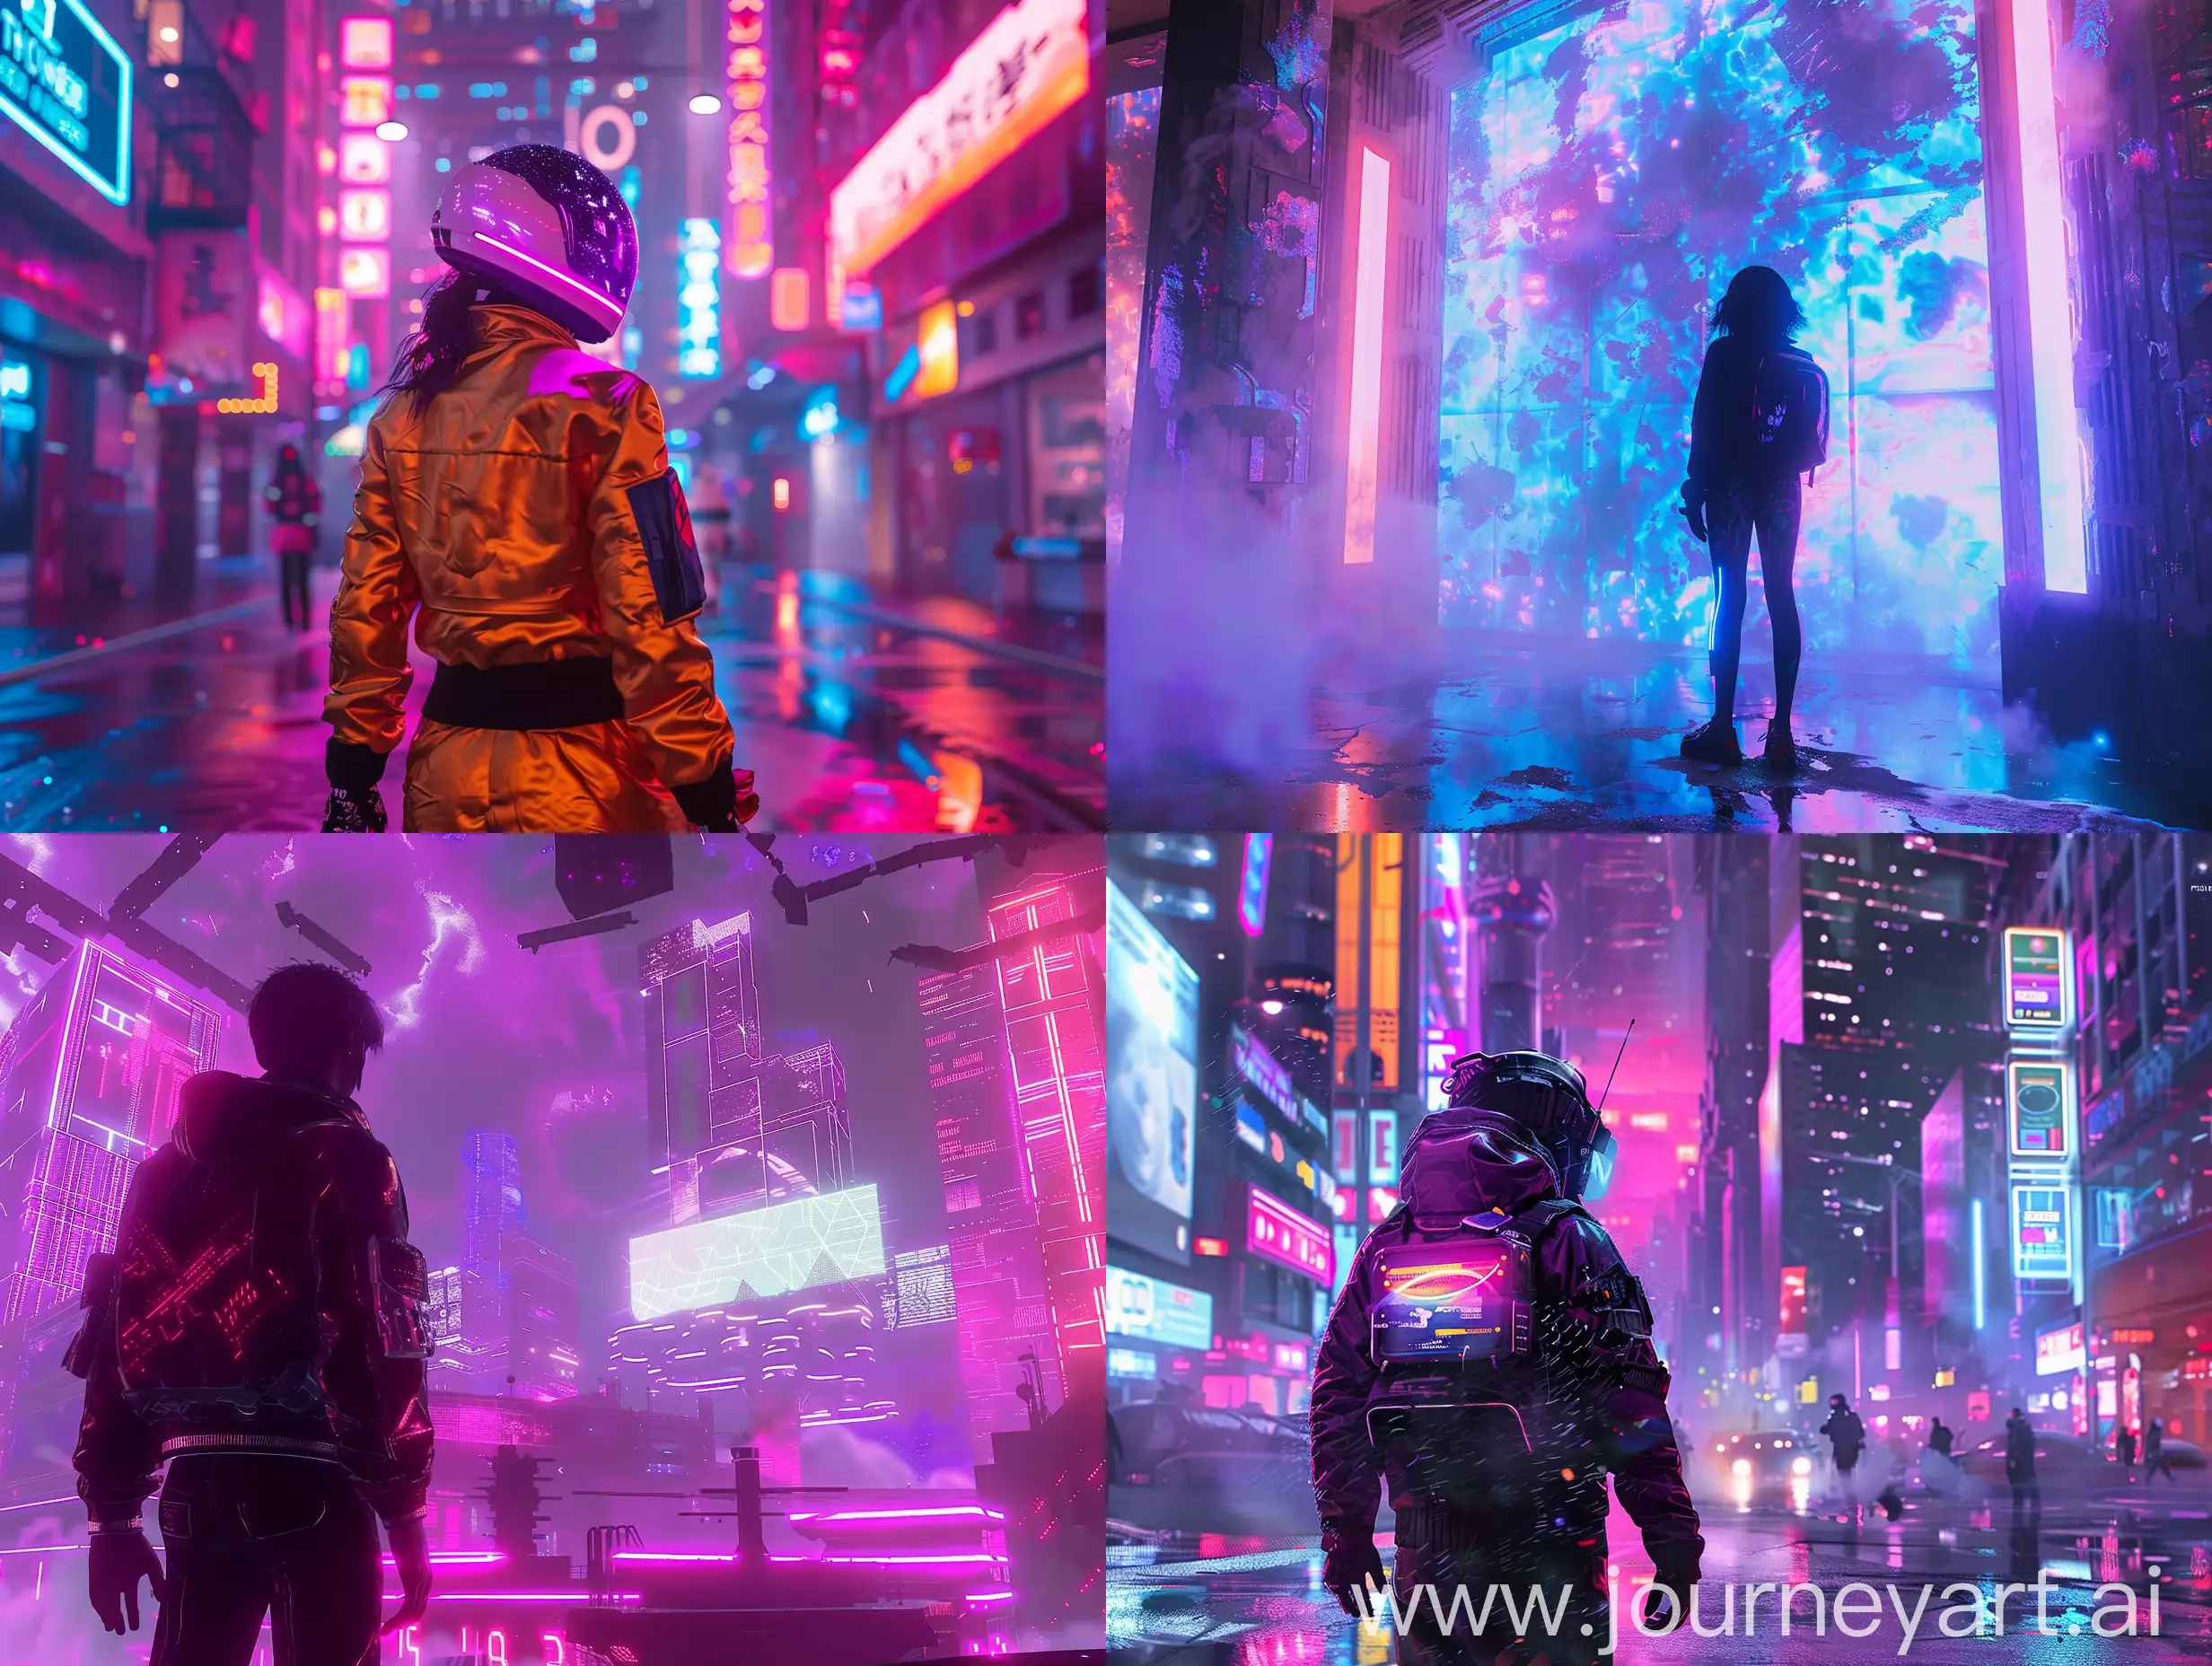 Aesthetic explorer in a dystopian and neon world